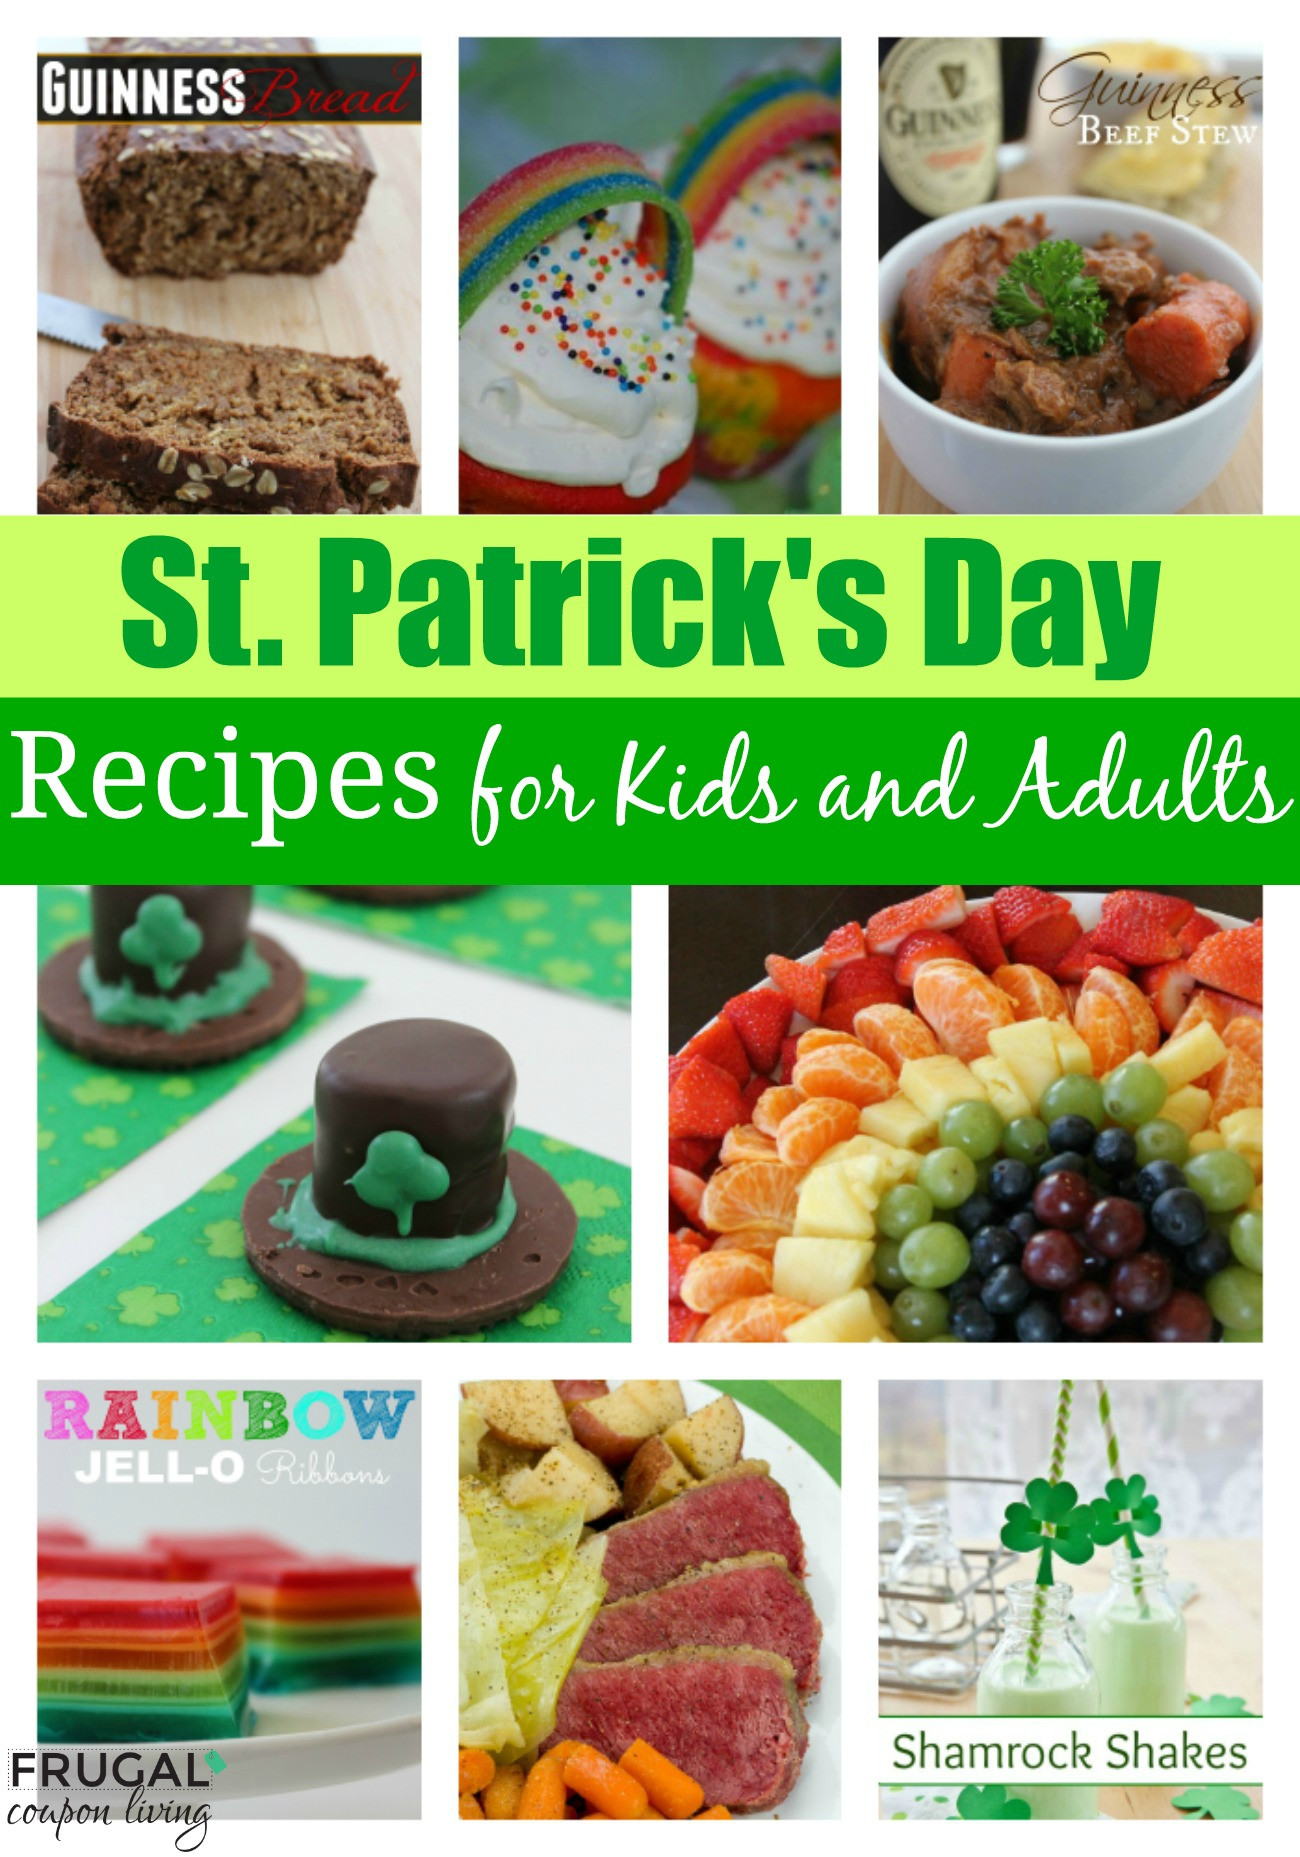 St Patrick's Day Food Recipes
 St Patrick s Day Food Ideas for Kids and Adults